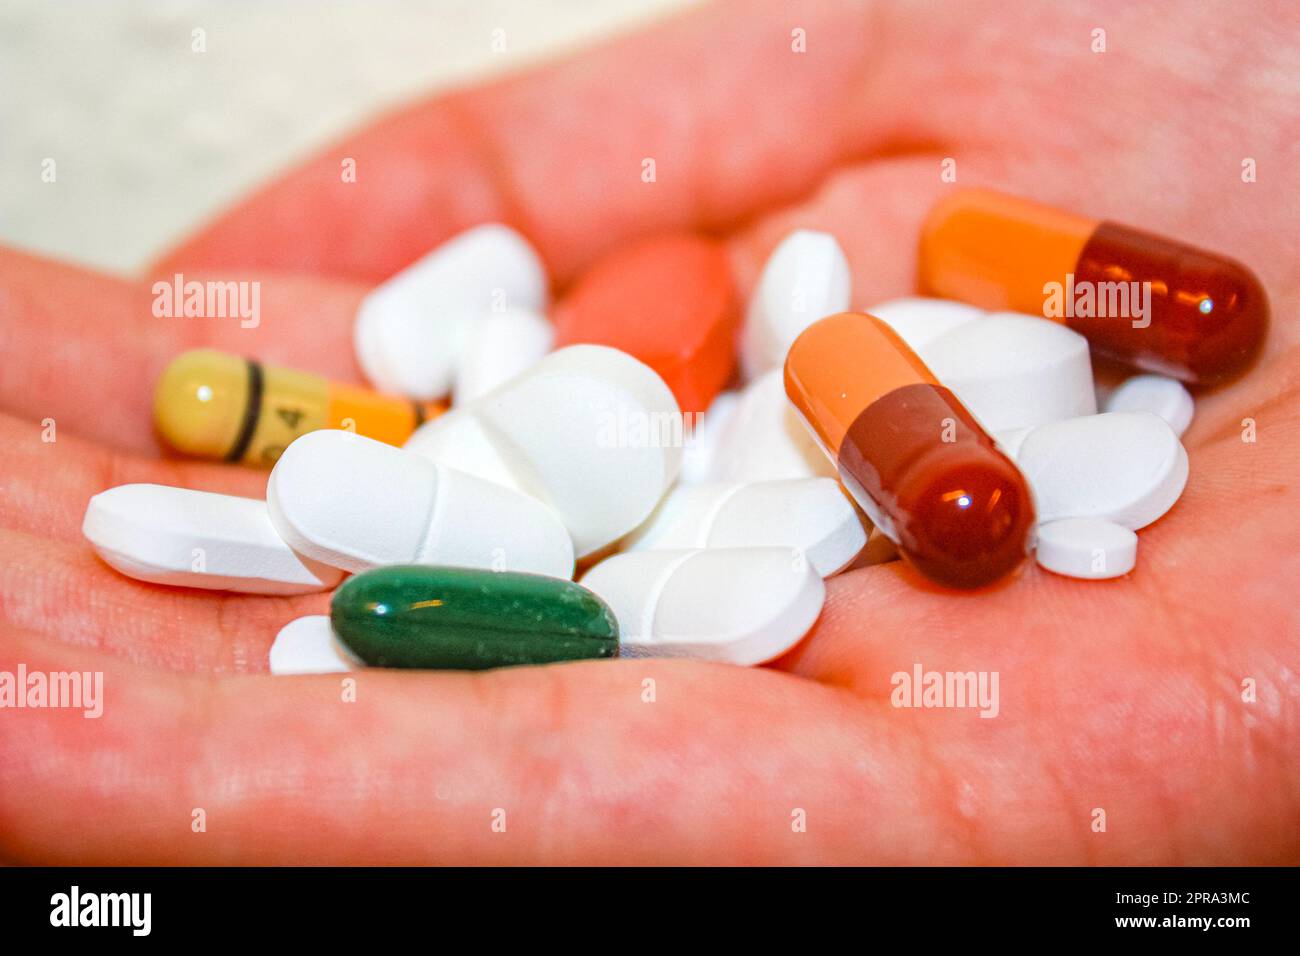 Drugs pills shots cigarettes and alcohol dependence and addiction. Stock Photo